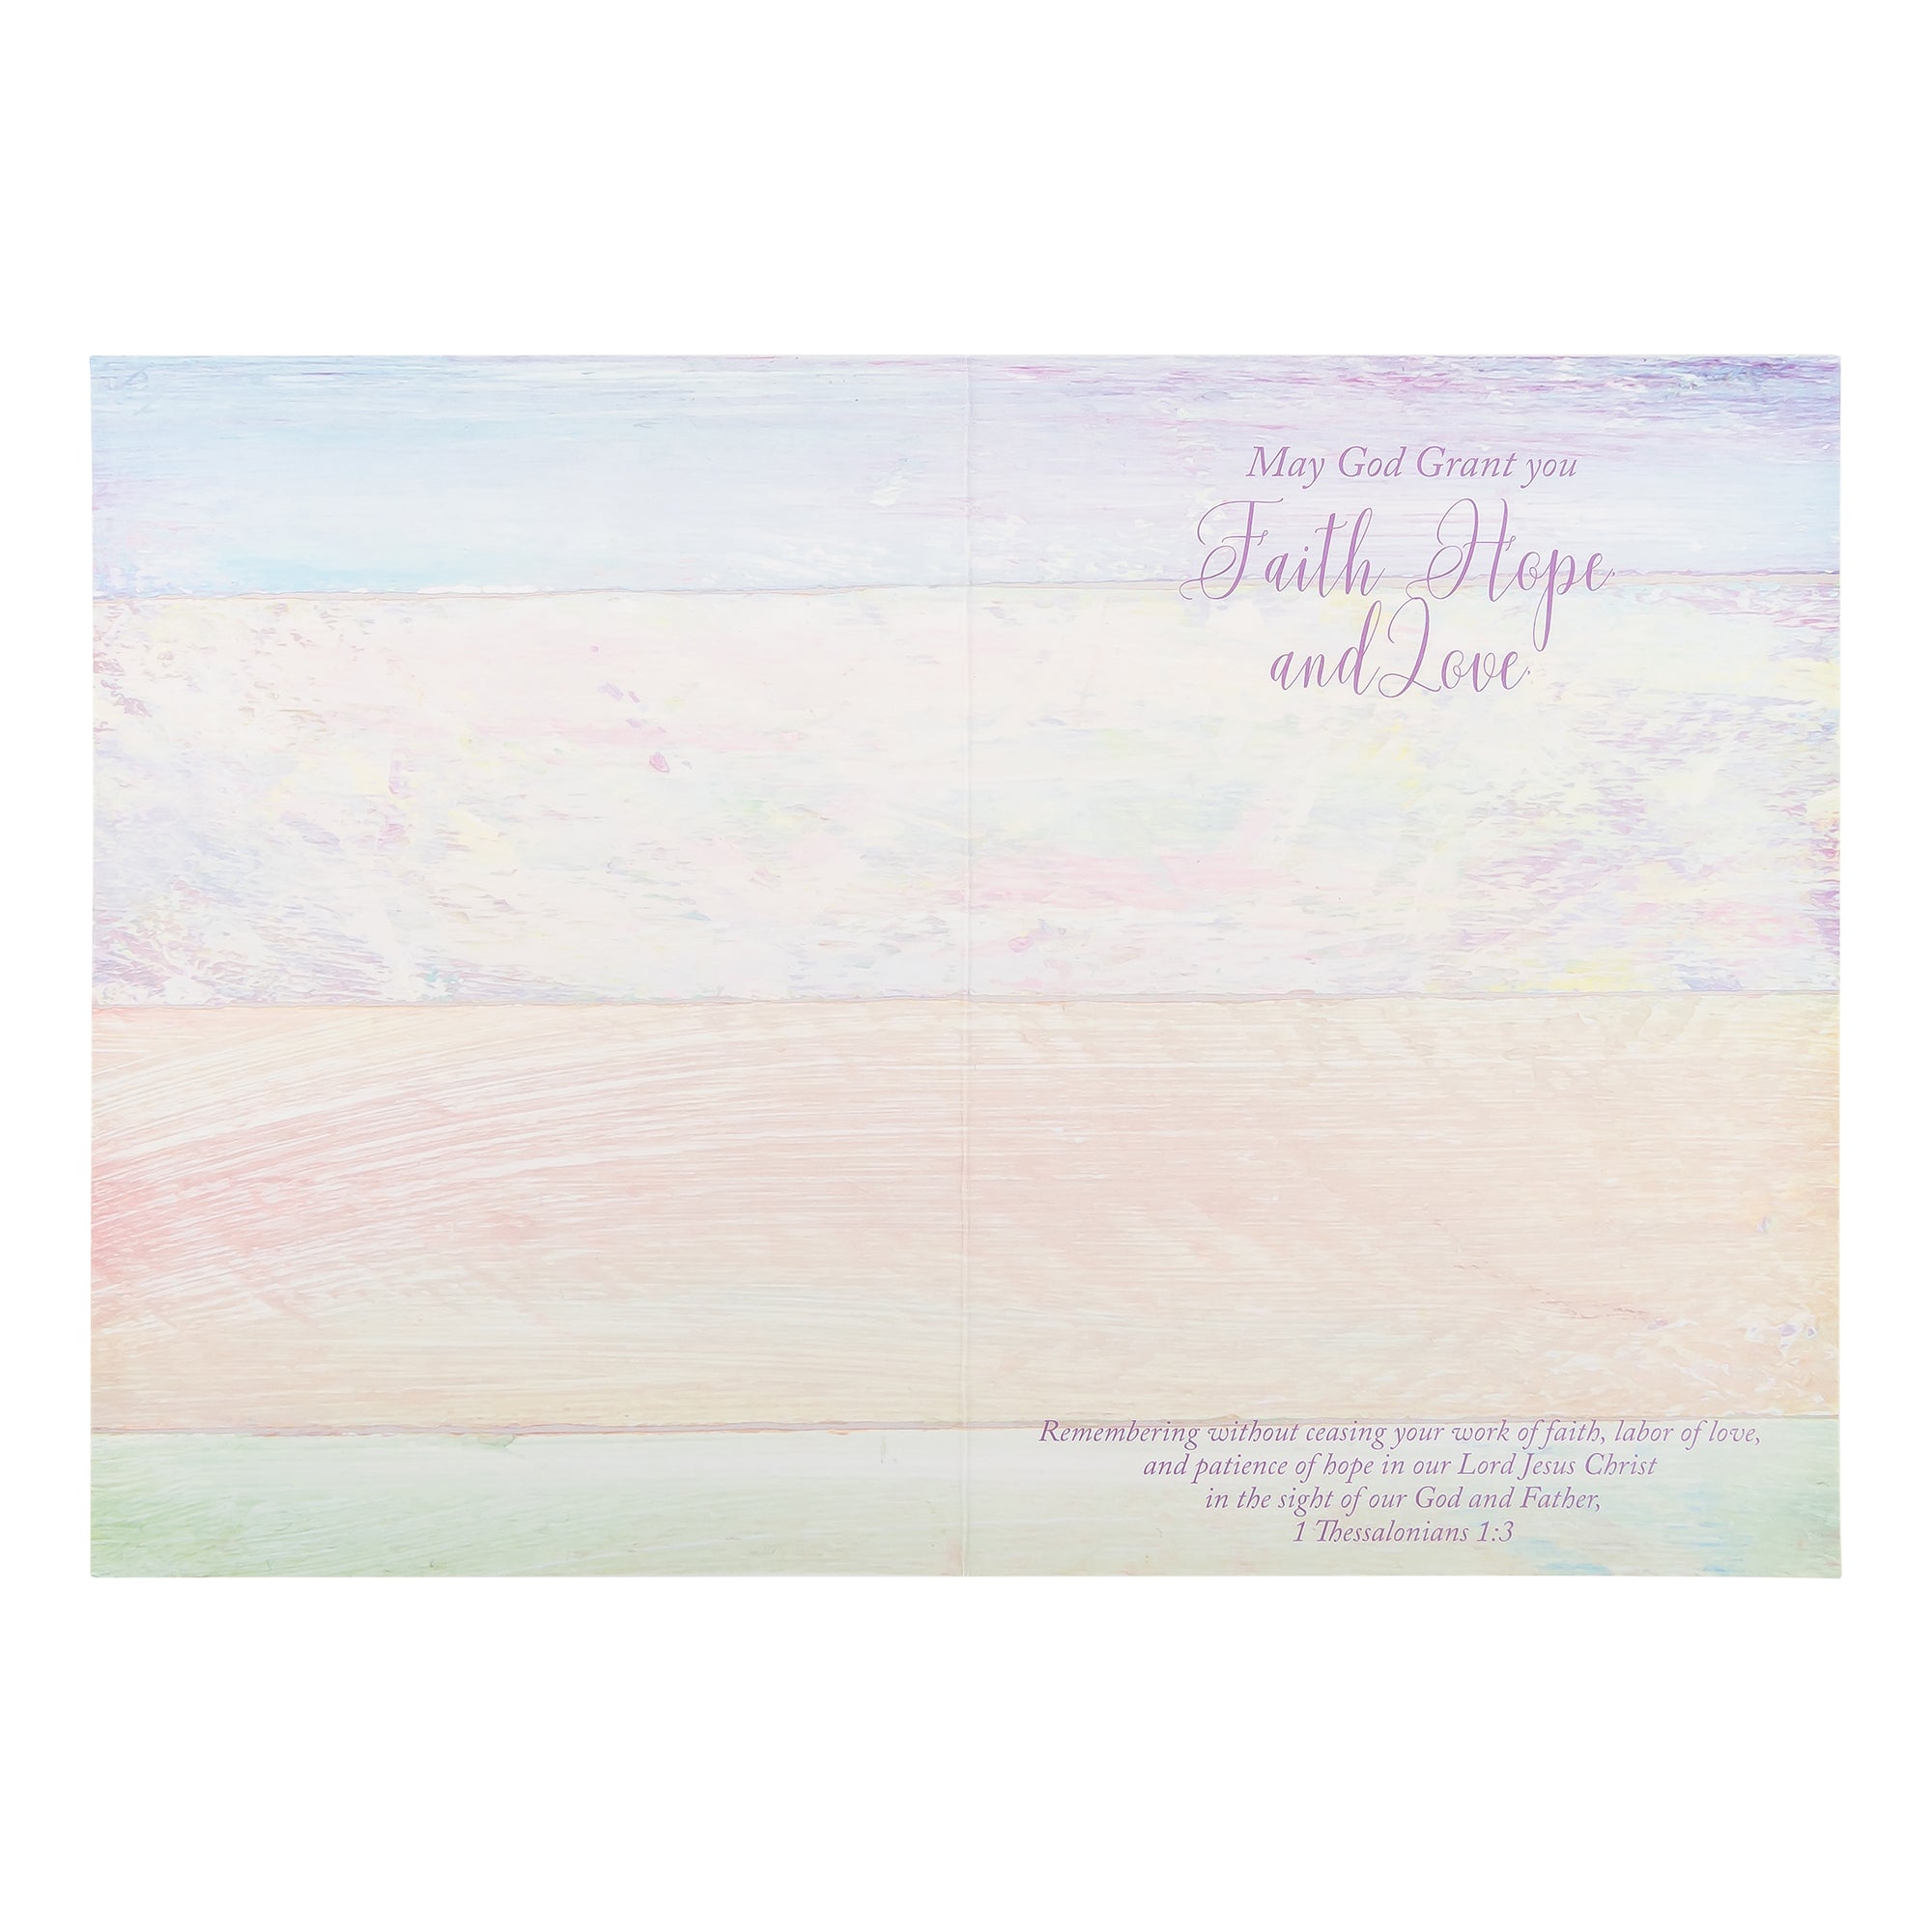 Boxed Cards: Encouragement, Multicolored Wood Planks